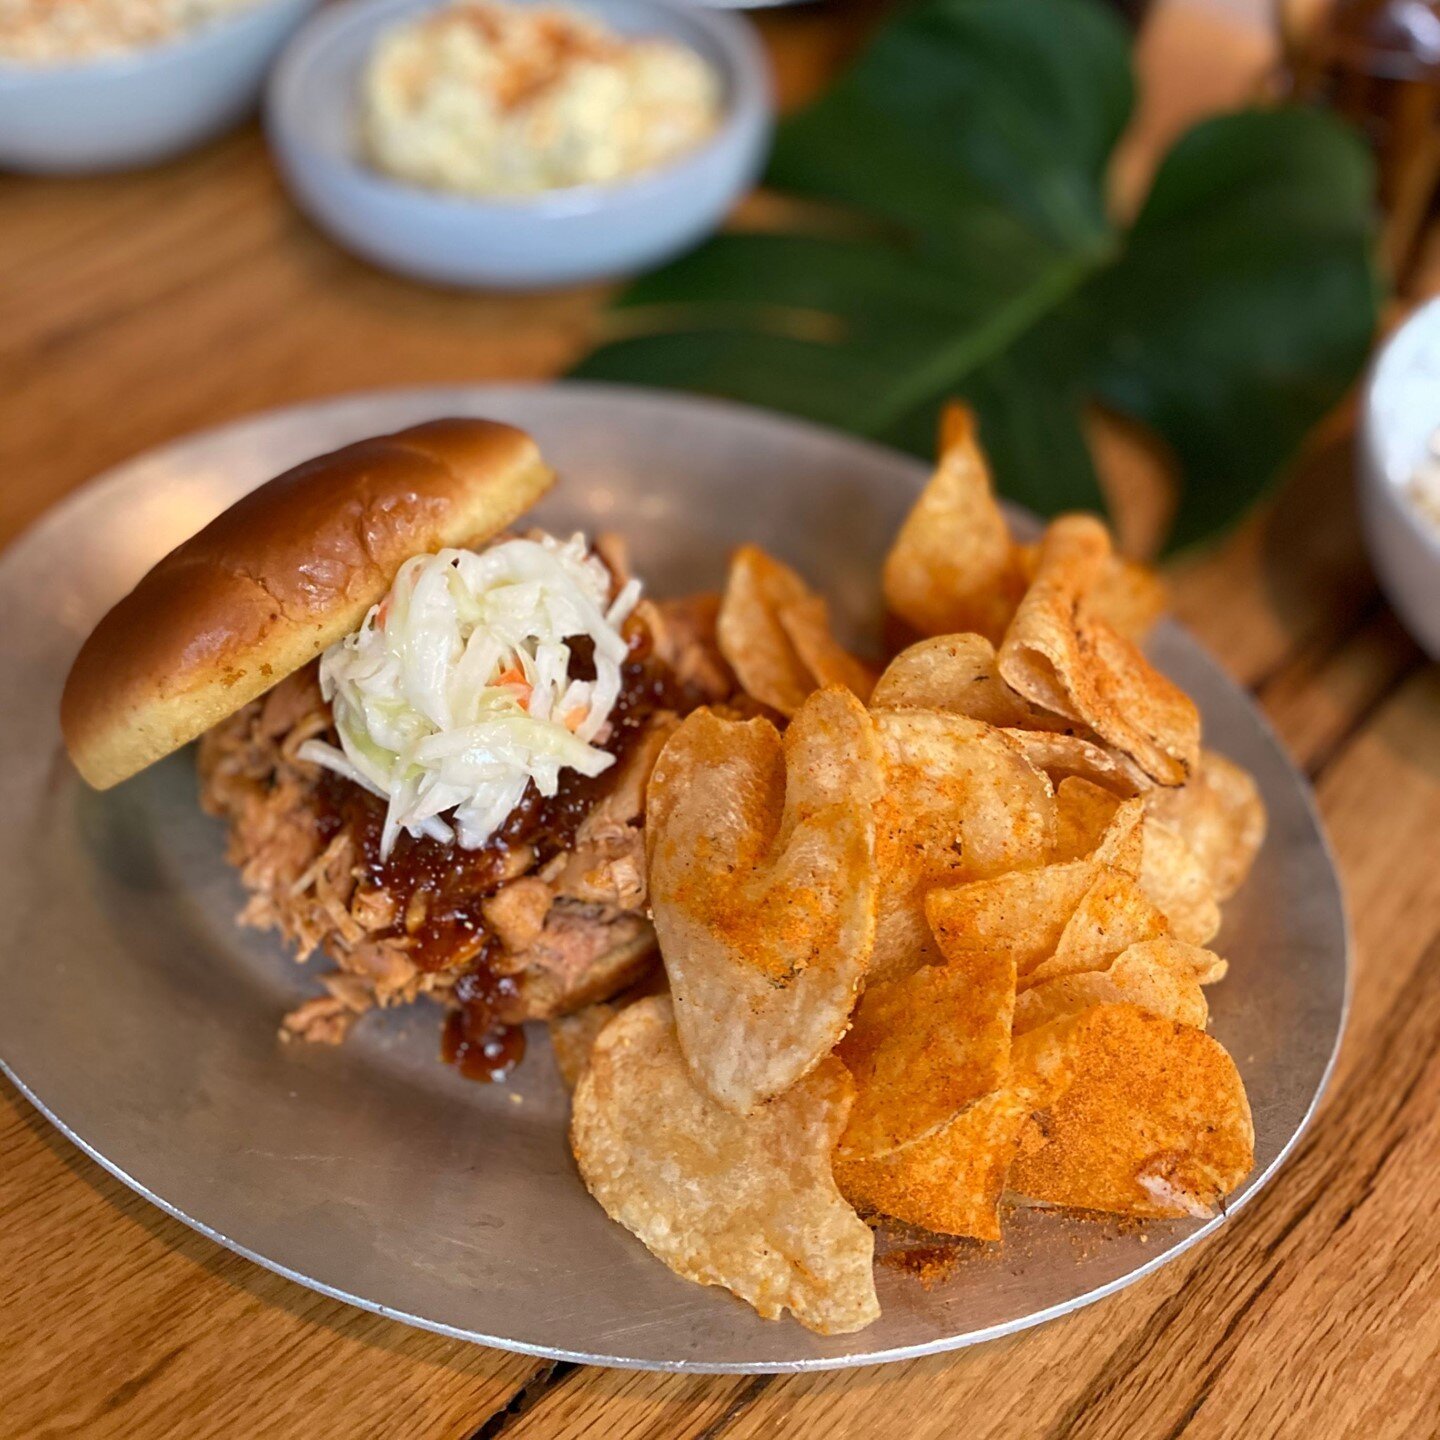 Treat yourself this Tuesday to a delicious BBQ sando! #treatyourselftuesday
.
.
.
#tuesdaytreat #tuesdaytasting #chicagofood #chicagobbq #bbqlovers #sandwichesofig